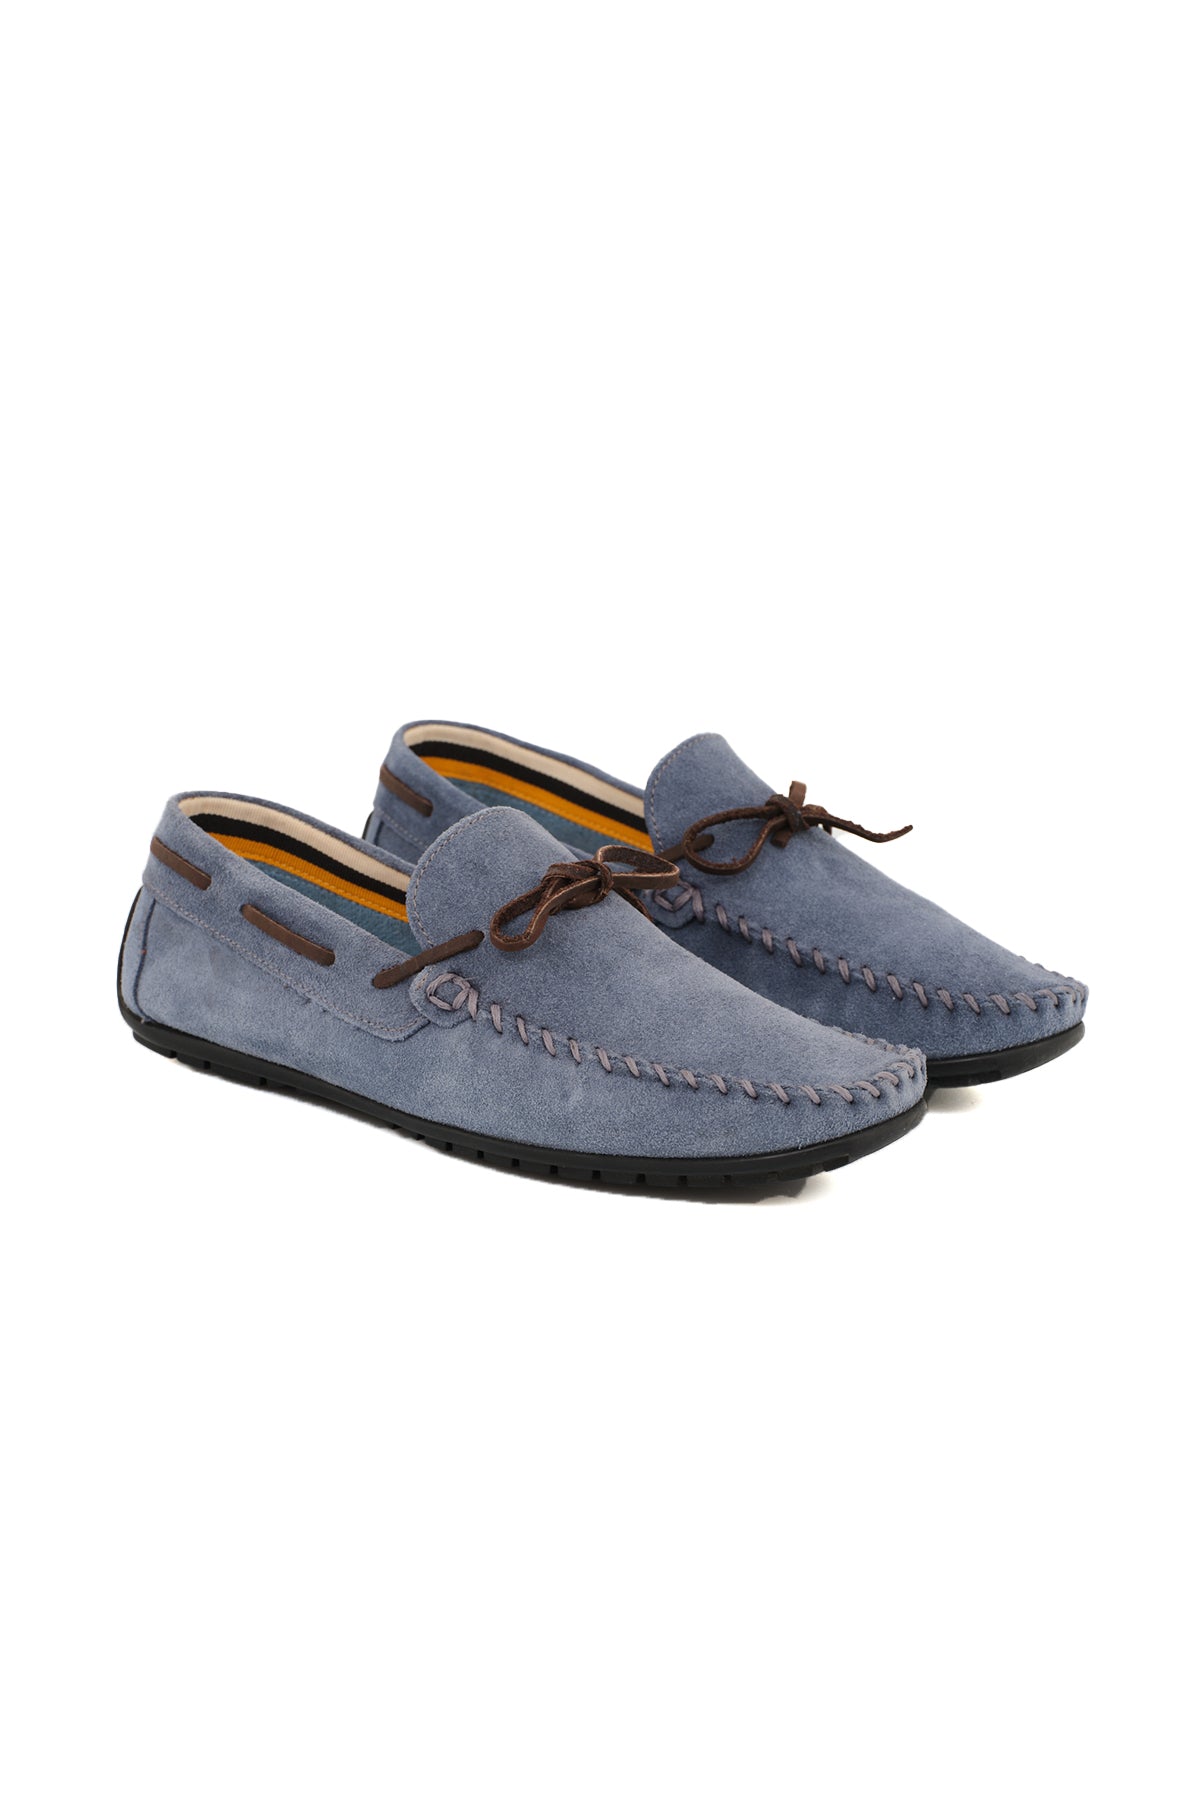 SUEDE CAR LOAFERS ΤΖΙΝ.